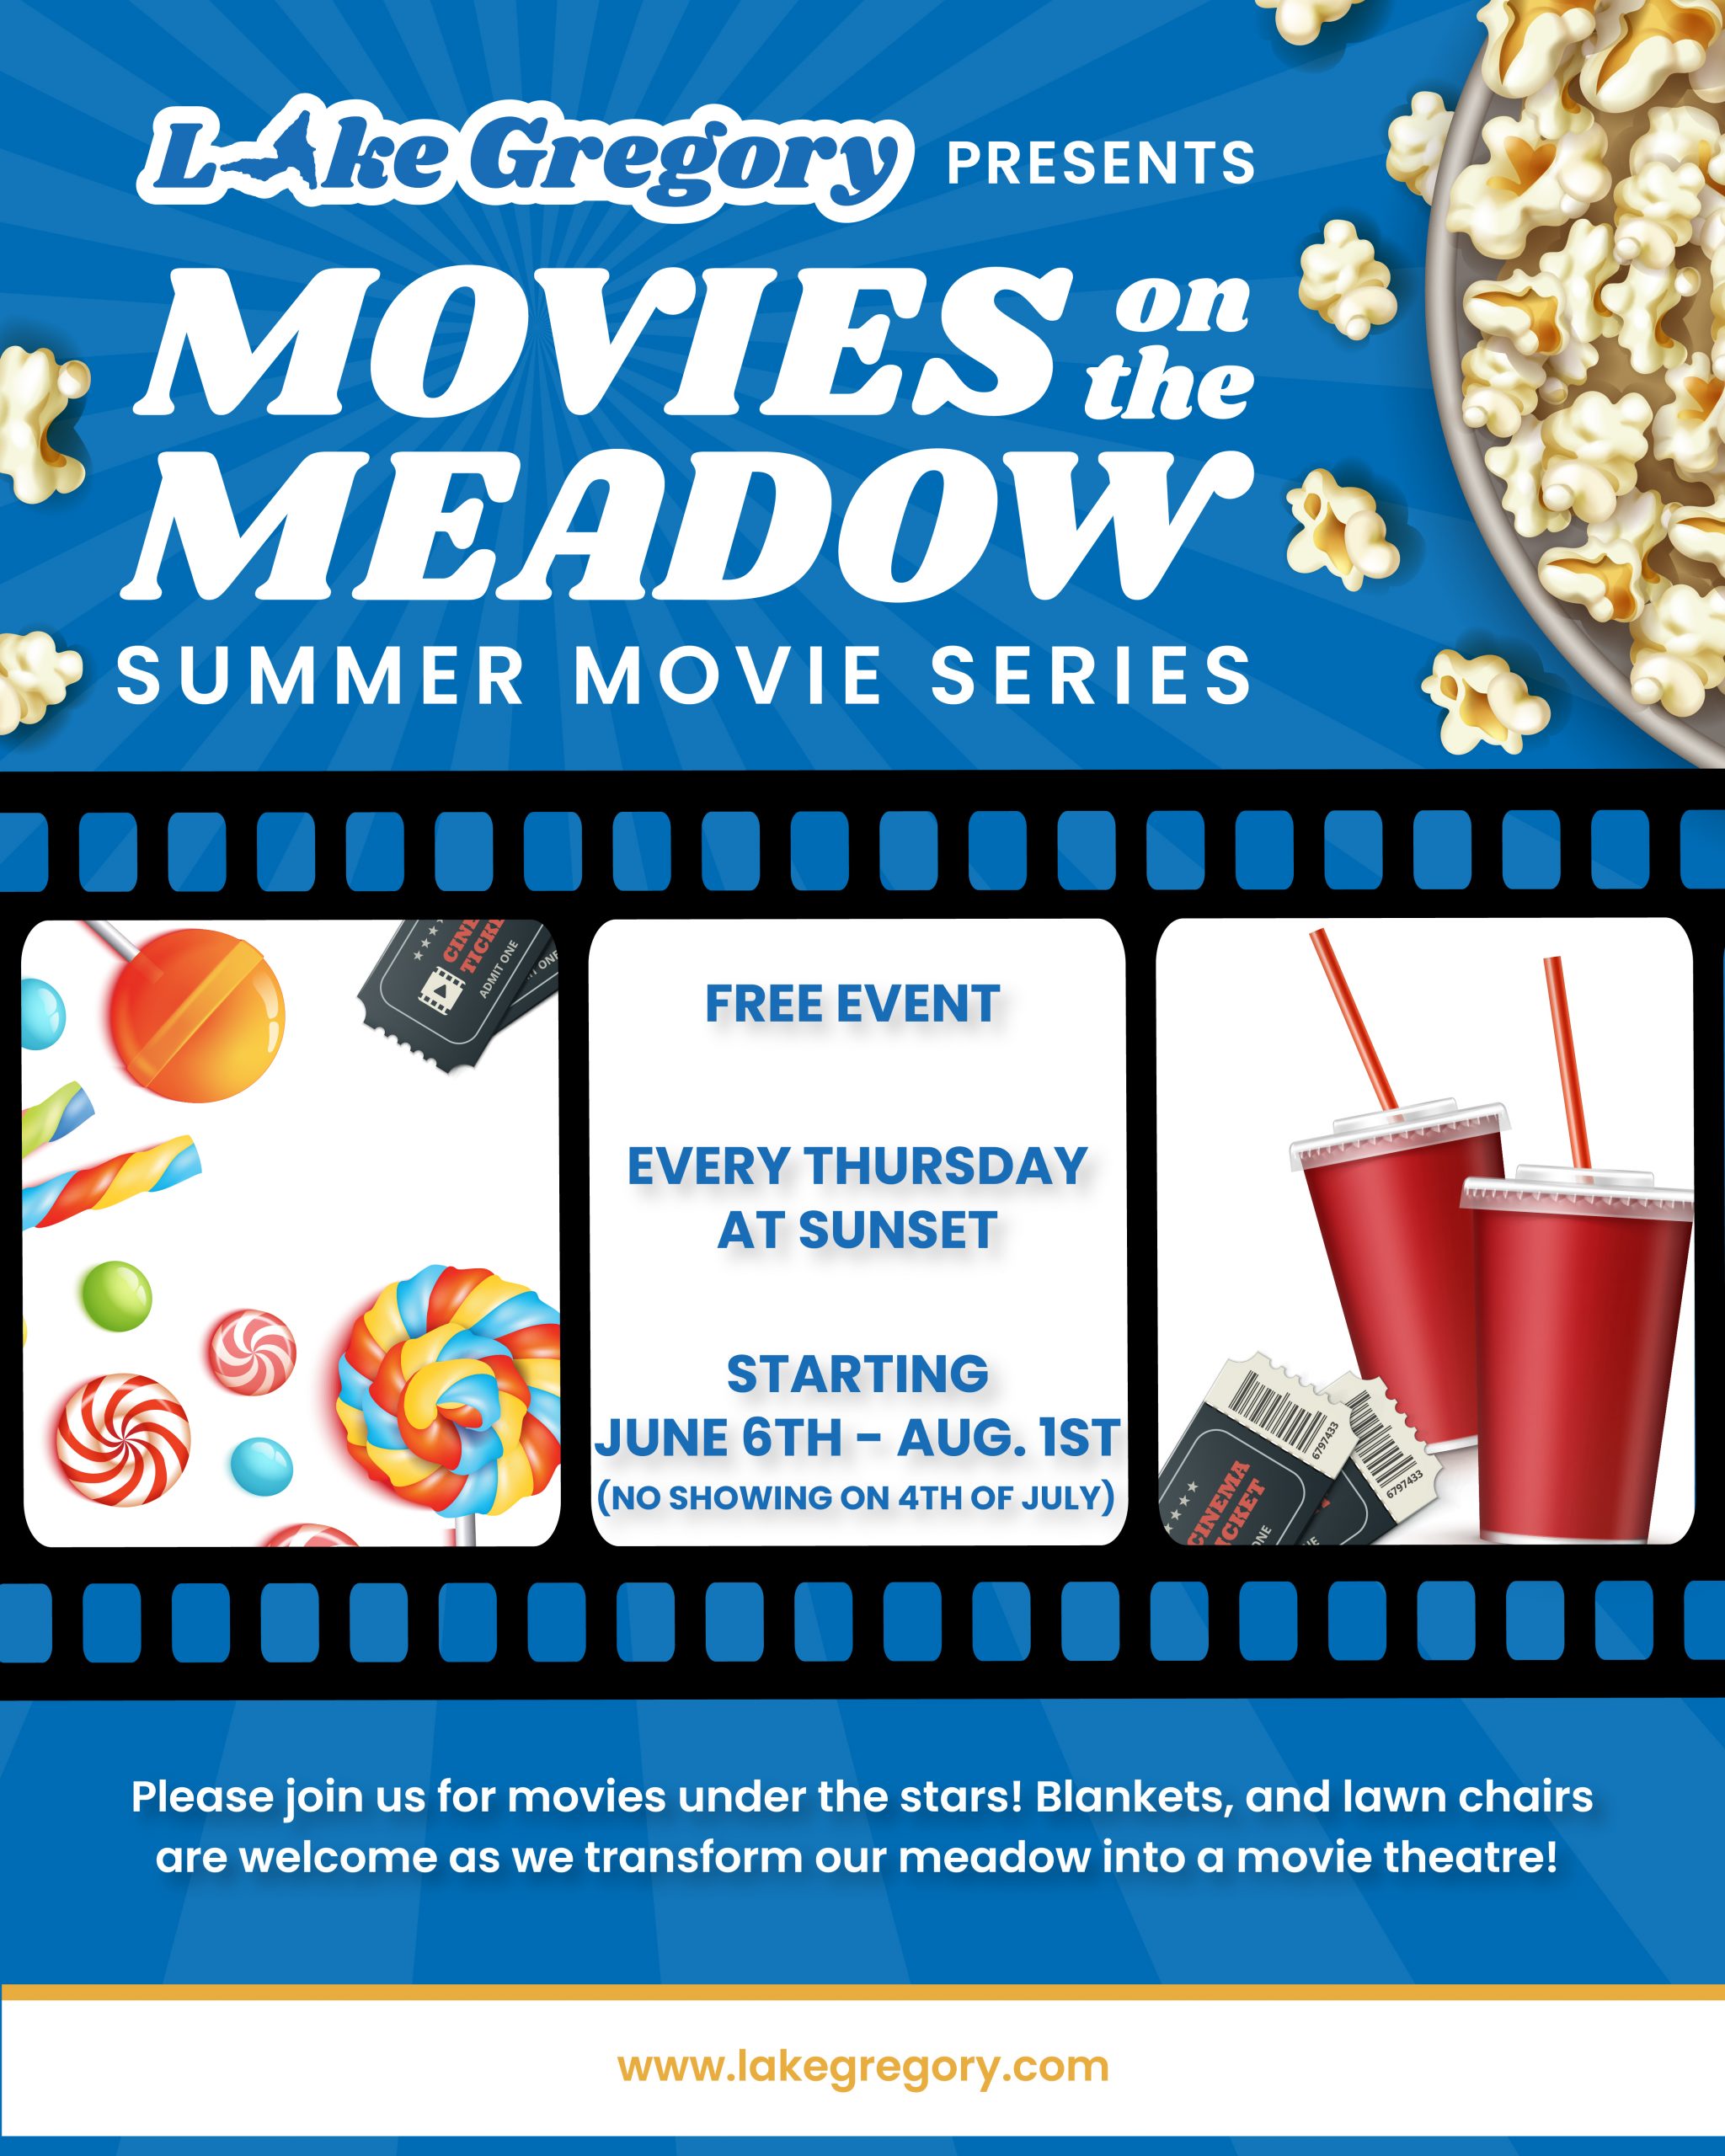 A background with a bowl of popcorn and an old-time film reel with soda cups and straws, candy and word advertising movies on the meadow at Lake Gregory evet Thursday from June 6 through August 1.